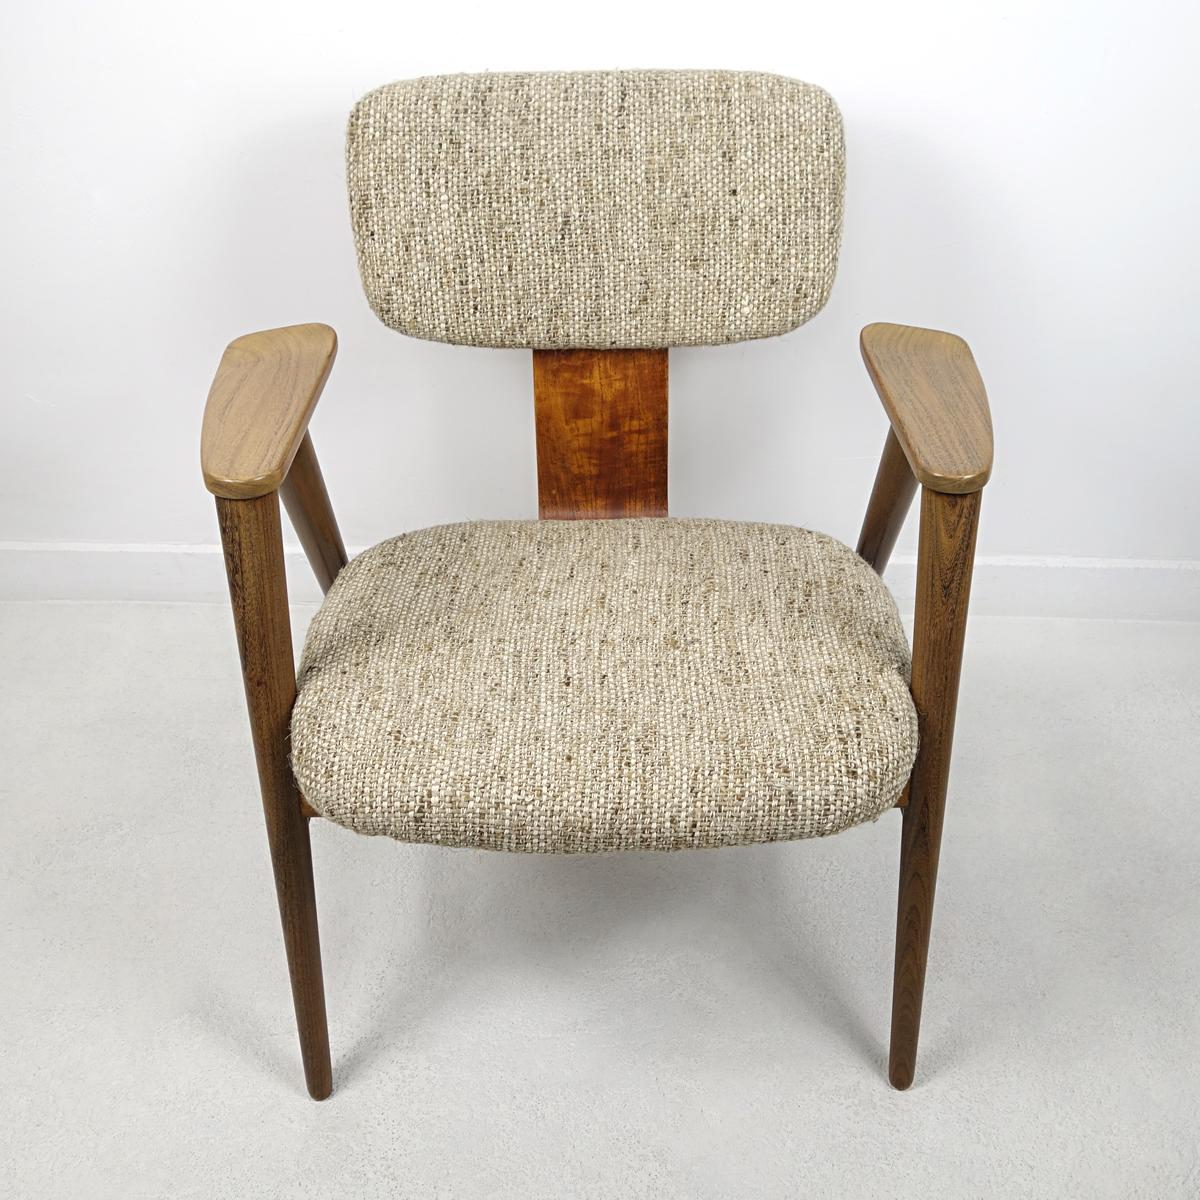 Elegance and beauty arre the words that describe this chair best. It was designed by Cees Braakman for the famous Dutch Pastoe label.
The chair has a frame of teak wood and has been reupholstered by us.